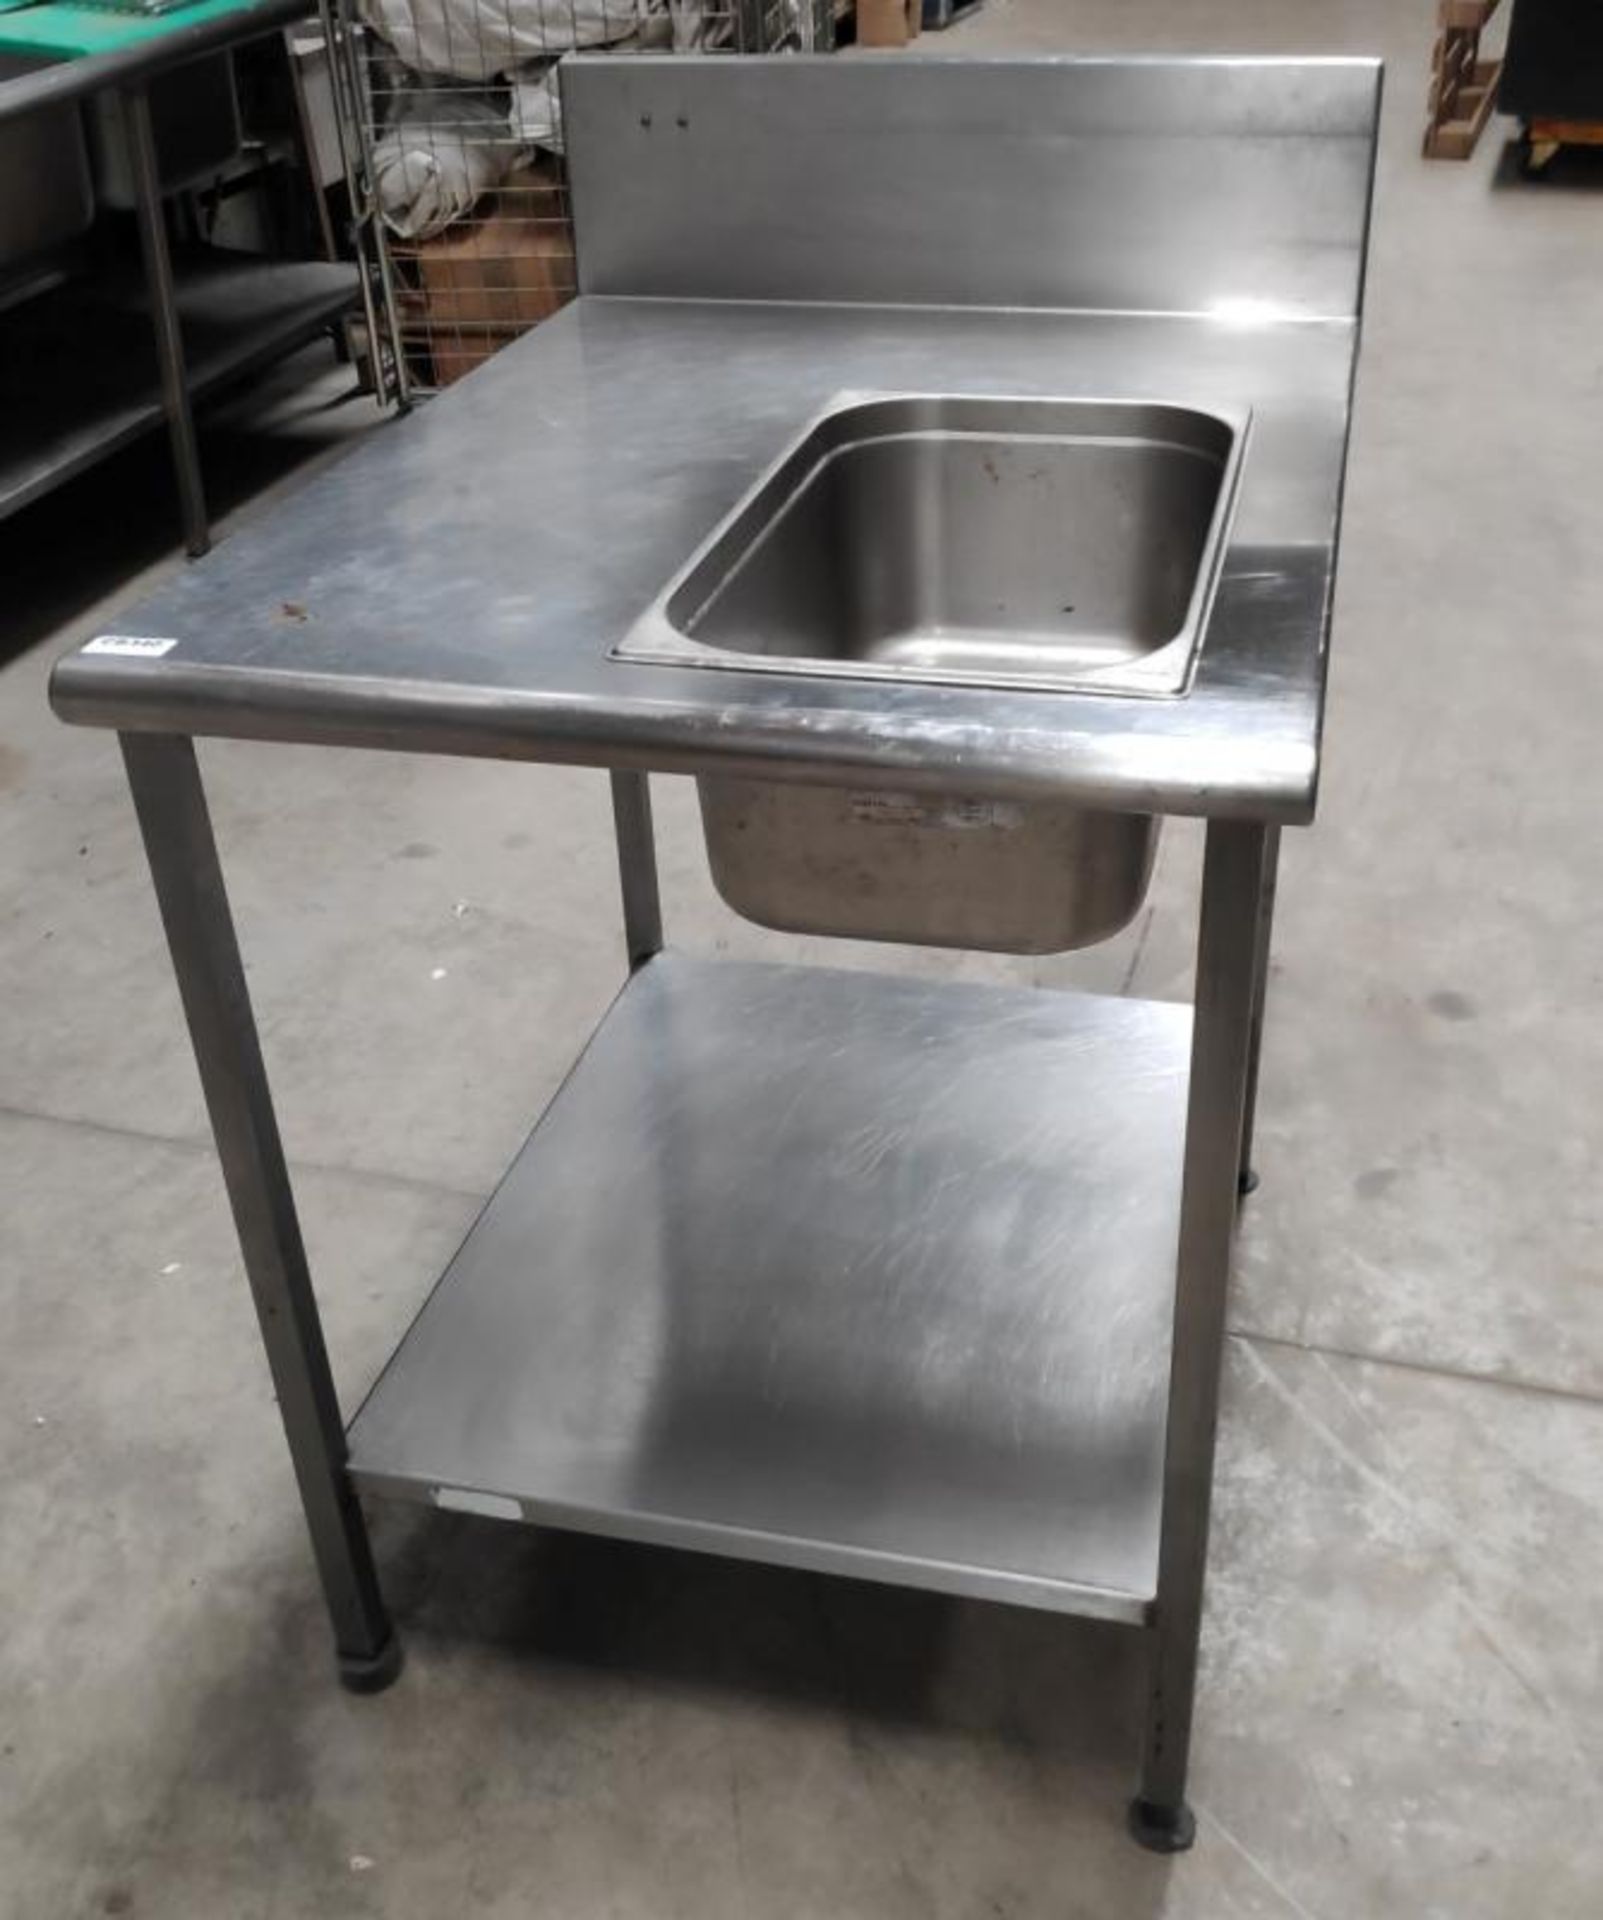 1 x Stainless Steel Commercial Kitchen Prep Table With Space for Gastronorm Pan (Included), Curved F